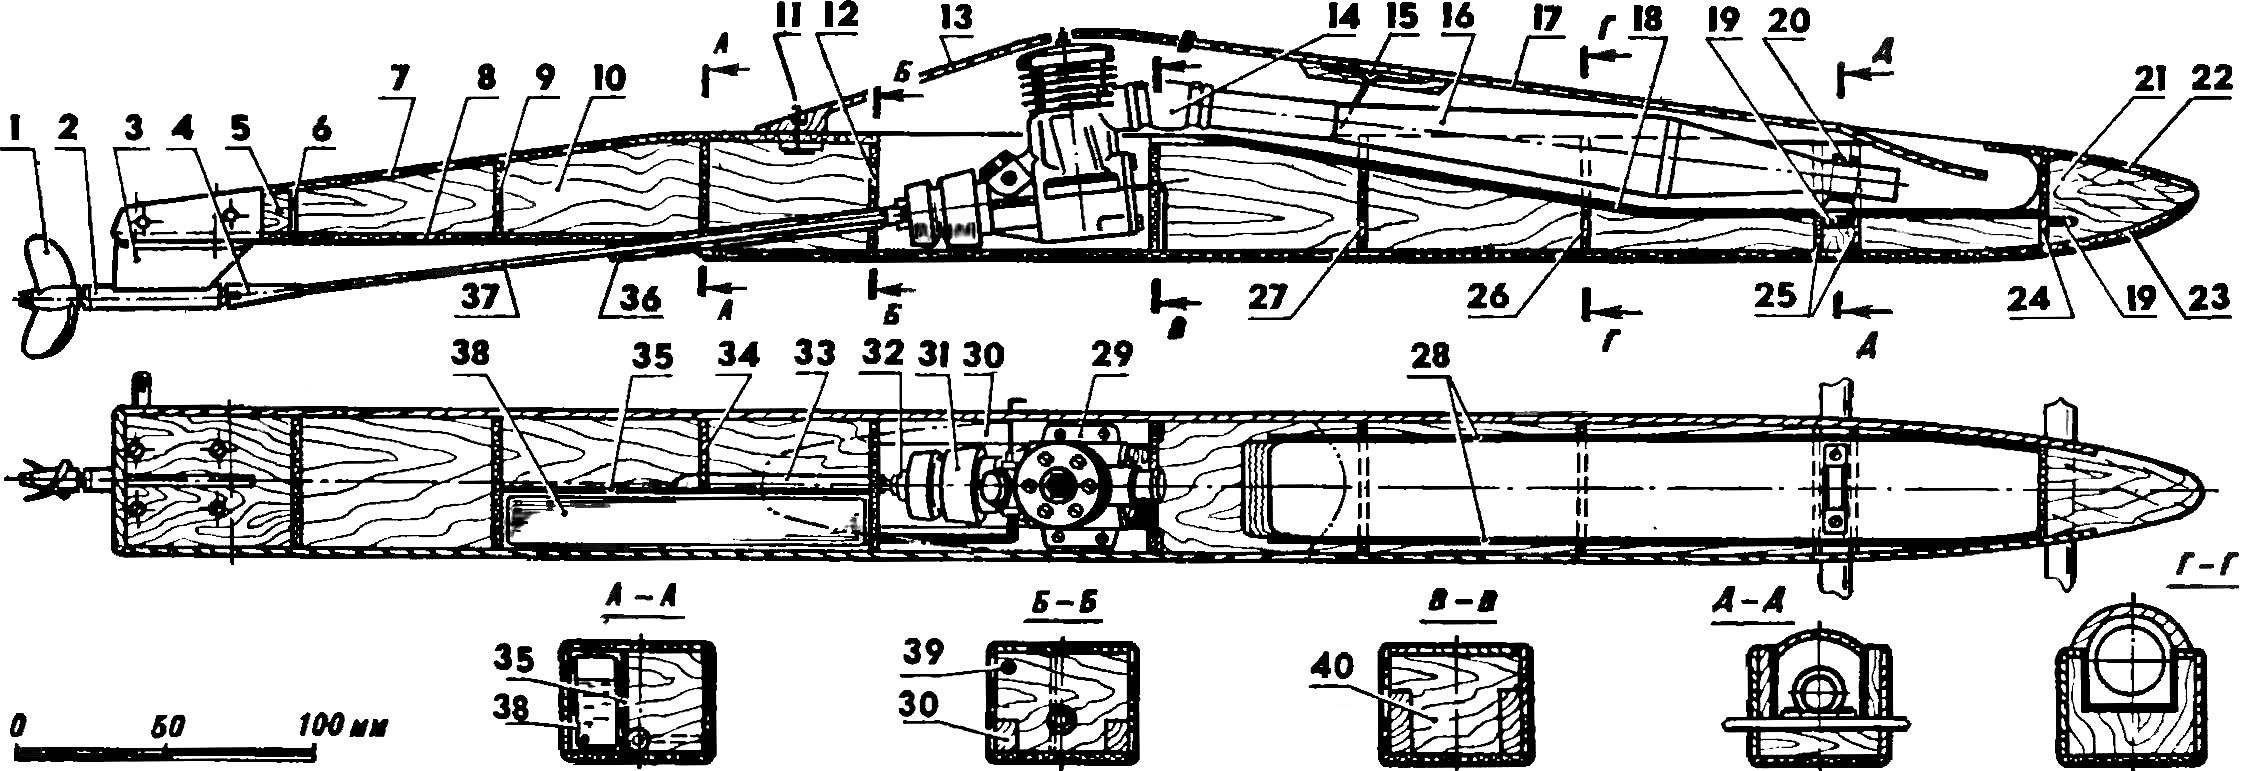 Fig. 2. The design of the model.